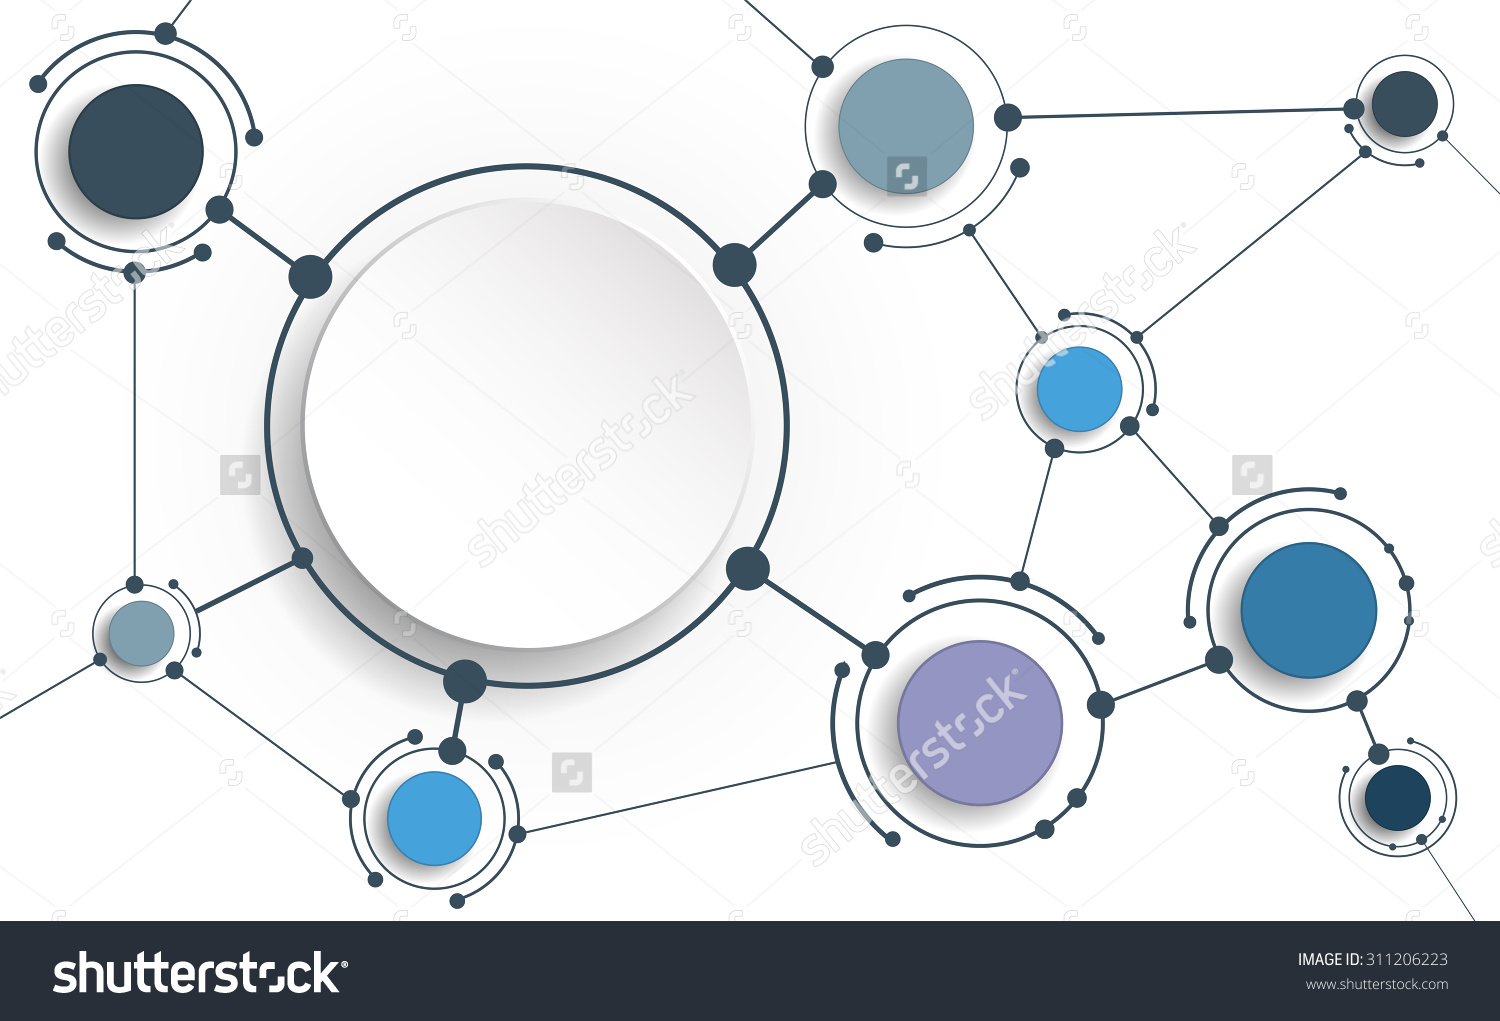 stock-vector-vector-abstract-molecules-with-d-paper-on-light-gray-background-communication-social-media-311206223